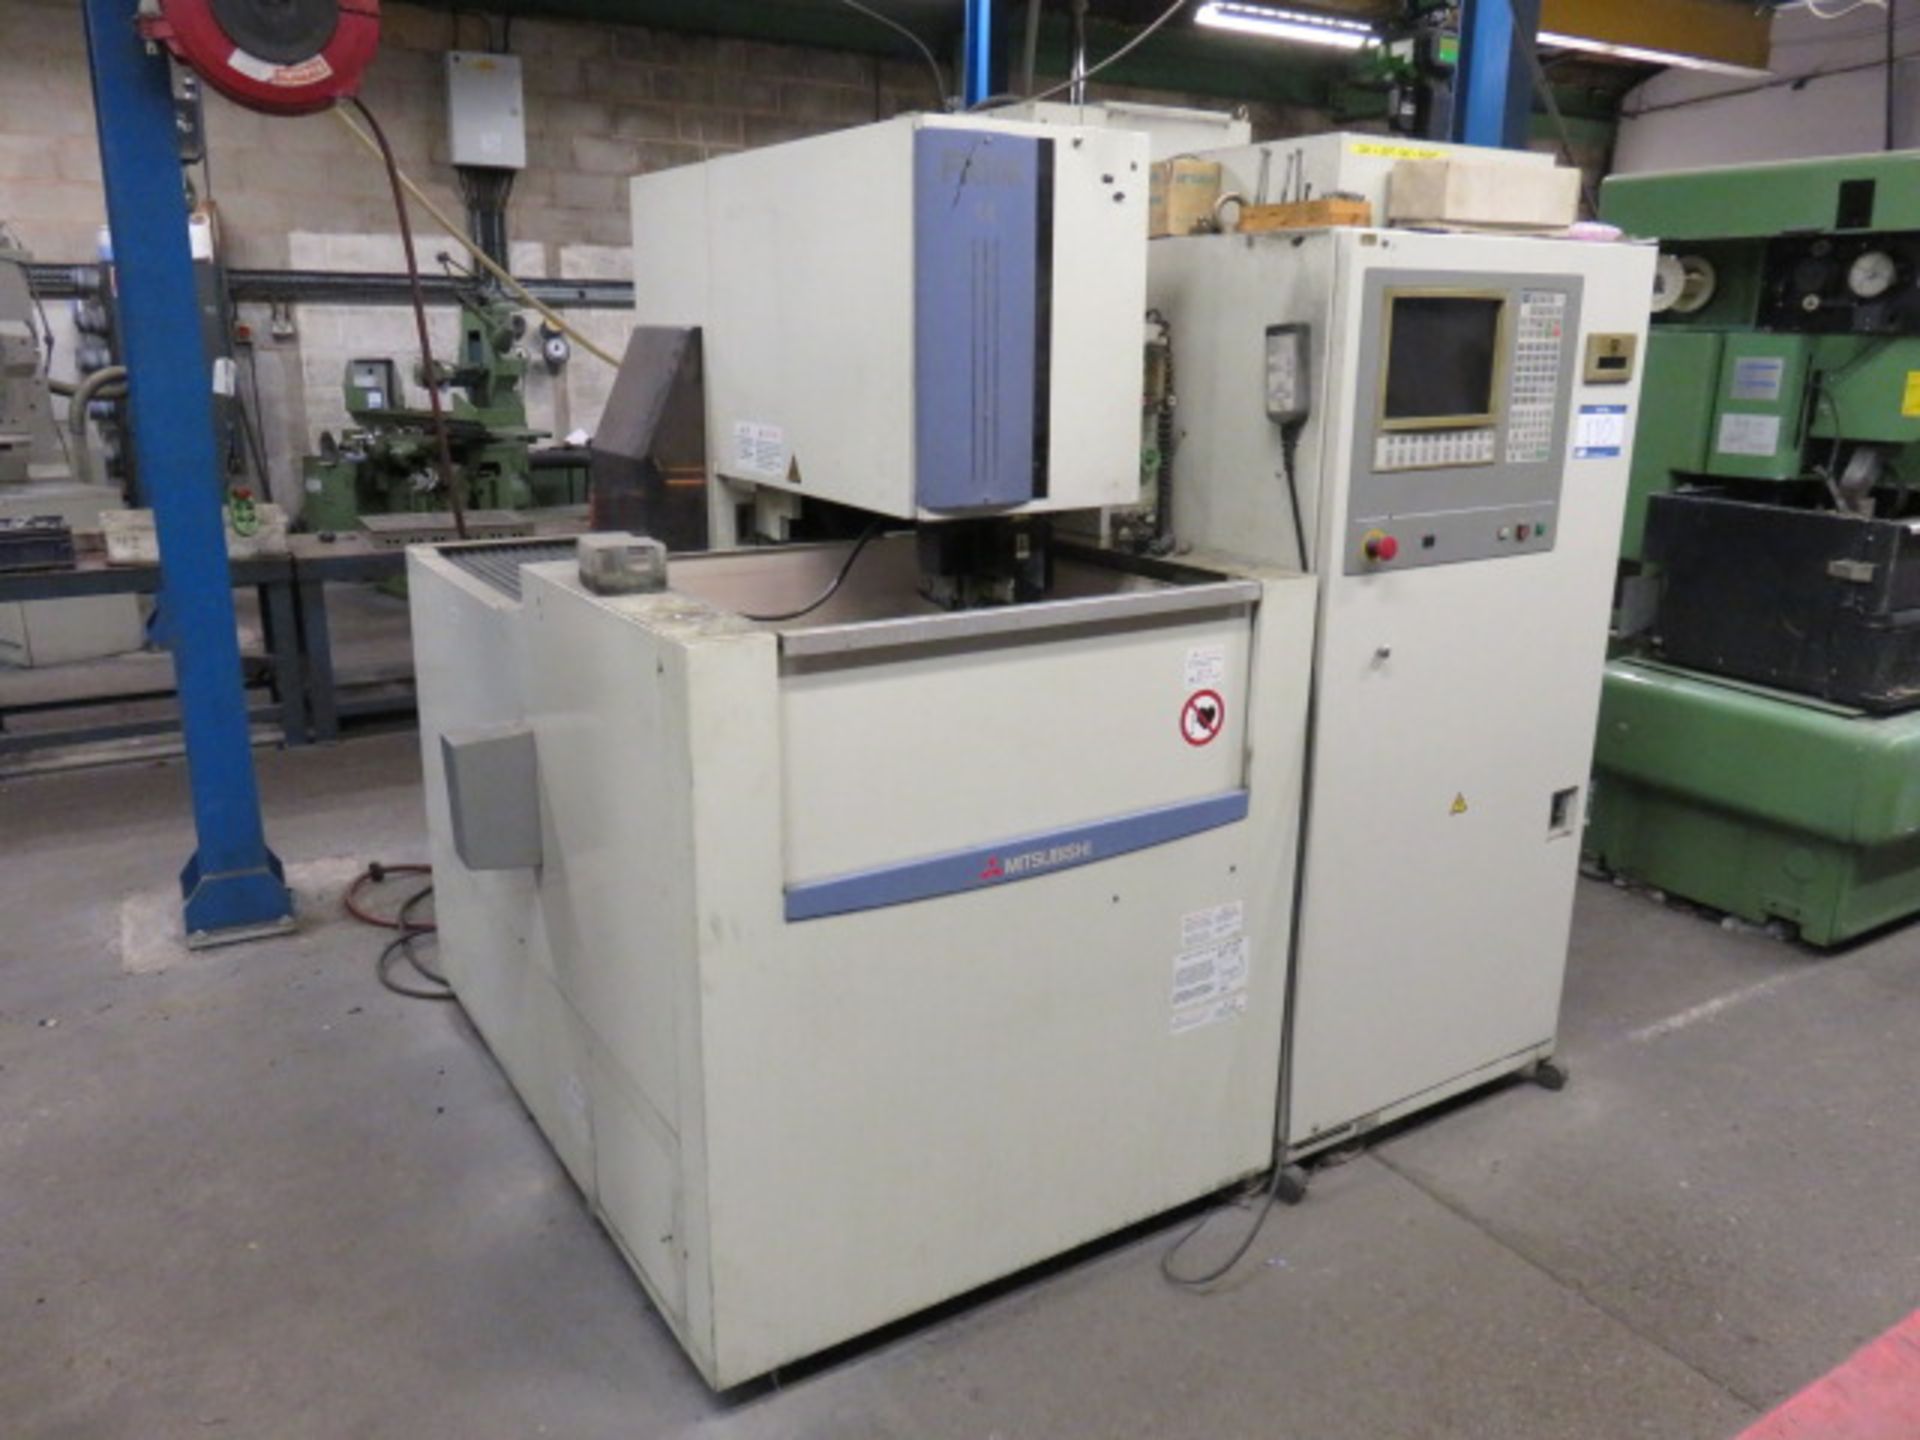 Mitsubushi FX10K CNC Wire Cutting Serial No.EDM01K10950 (2001) with Mitsubishi HE-UV3-03A Mist Coole - Image 2 of 2